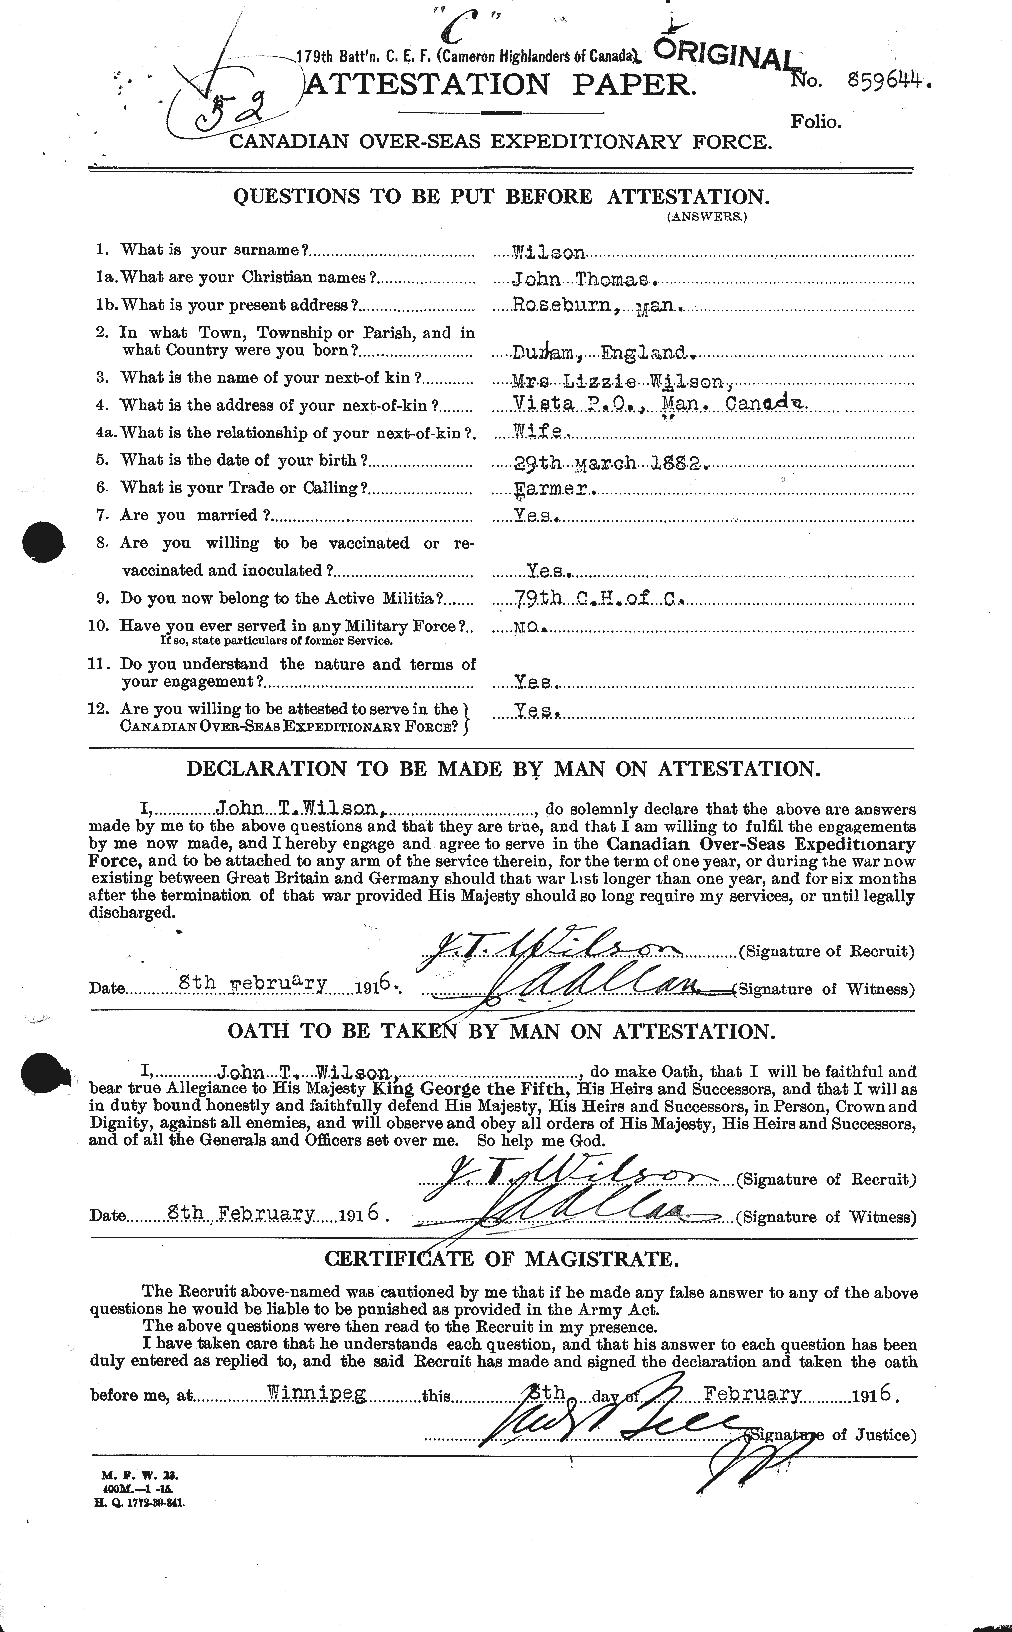 Personnel Records of the First World War - CEF 678518a